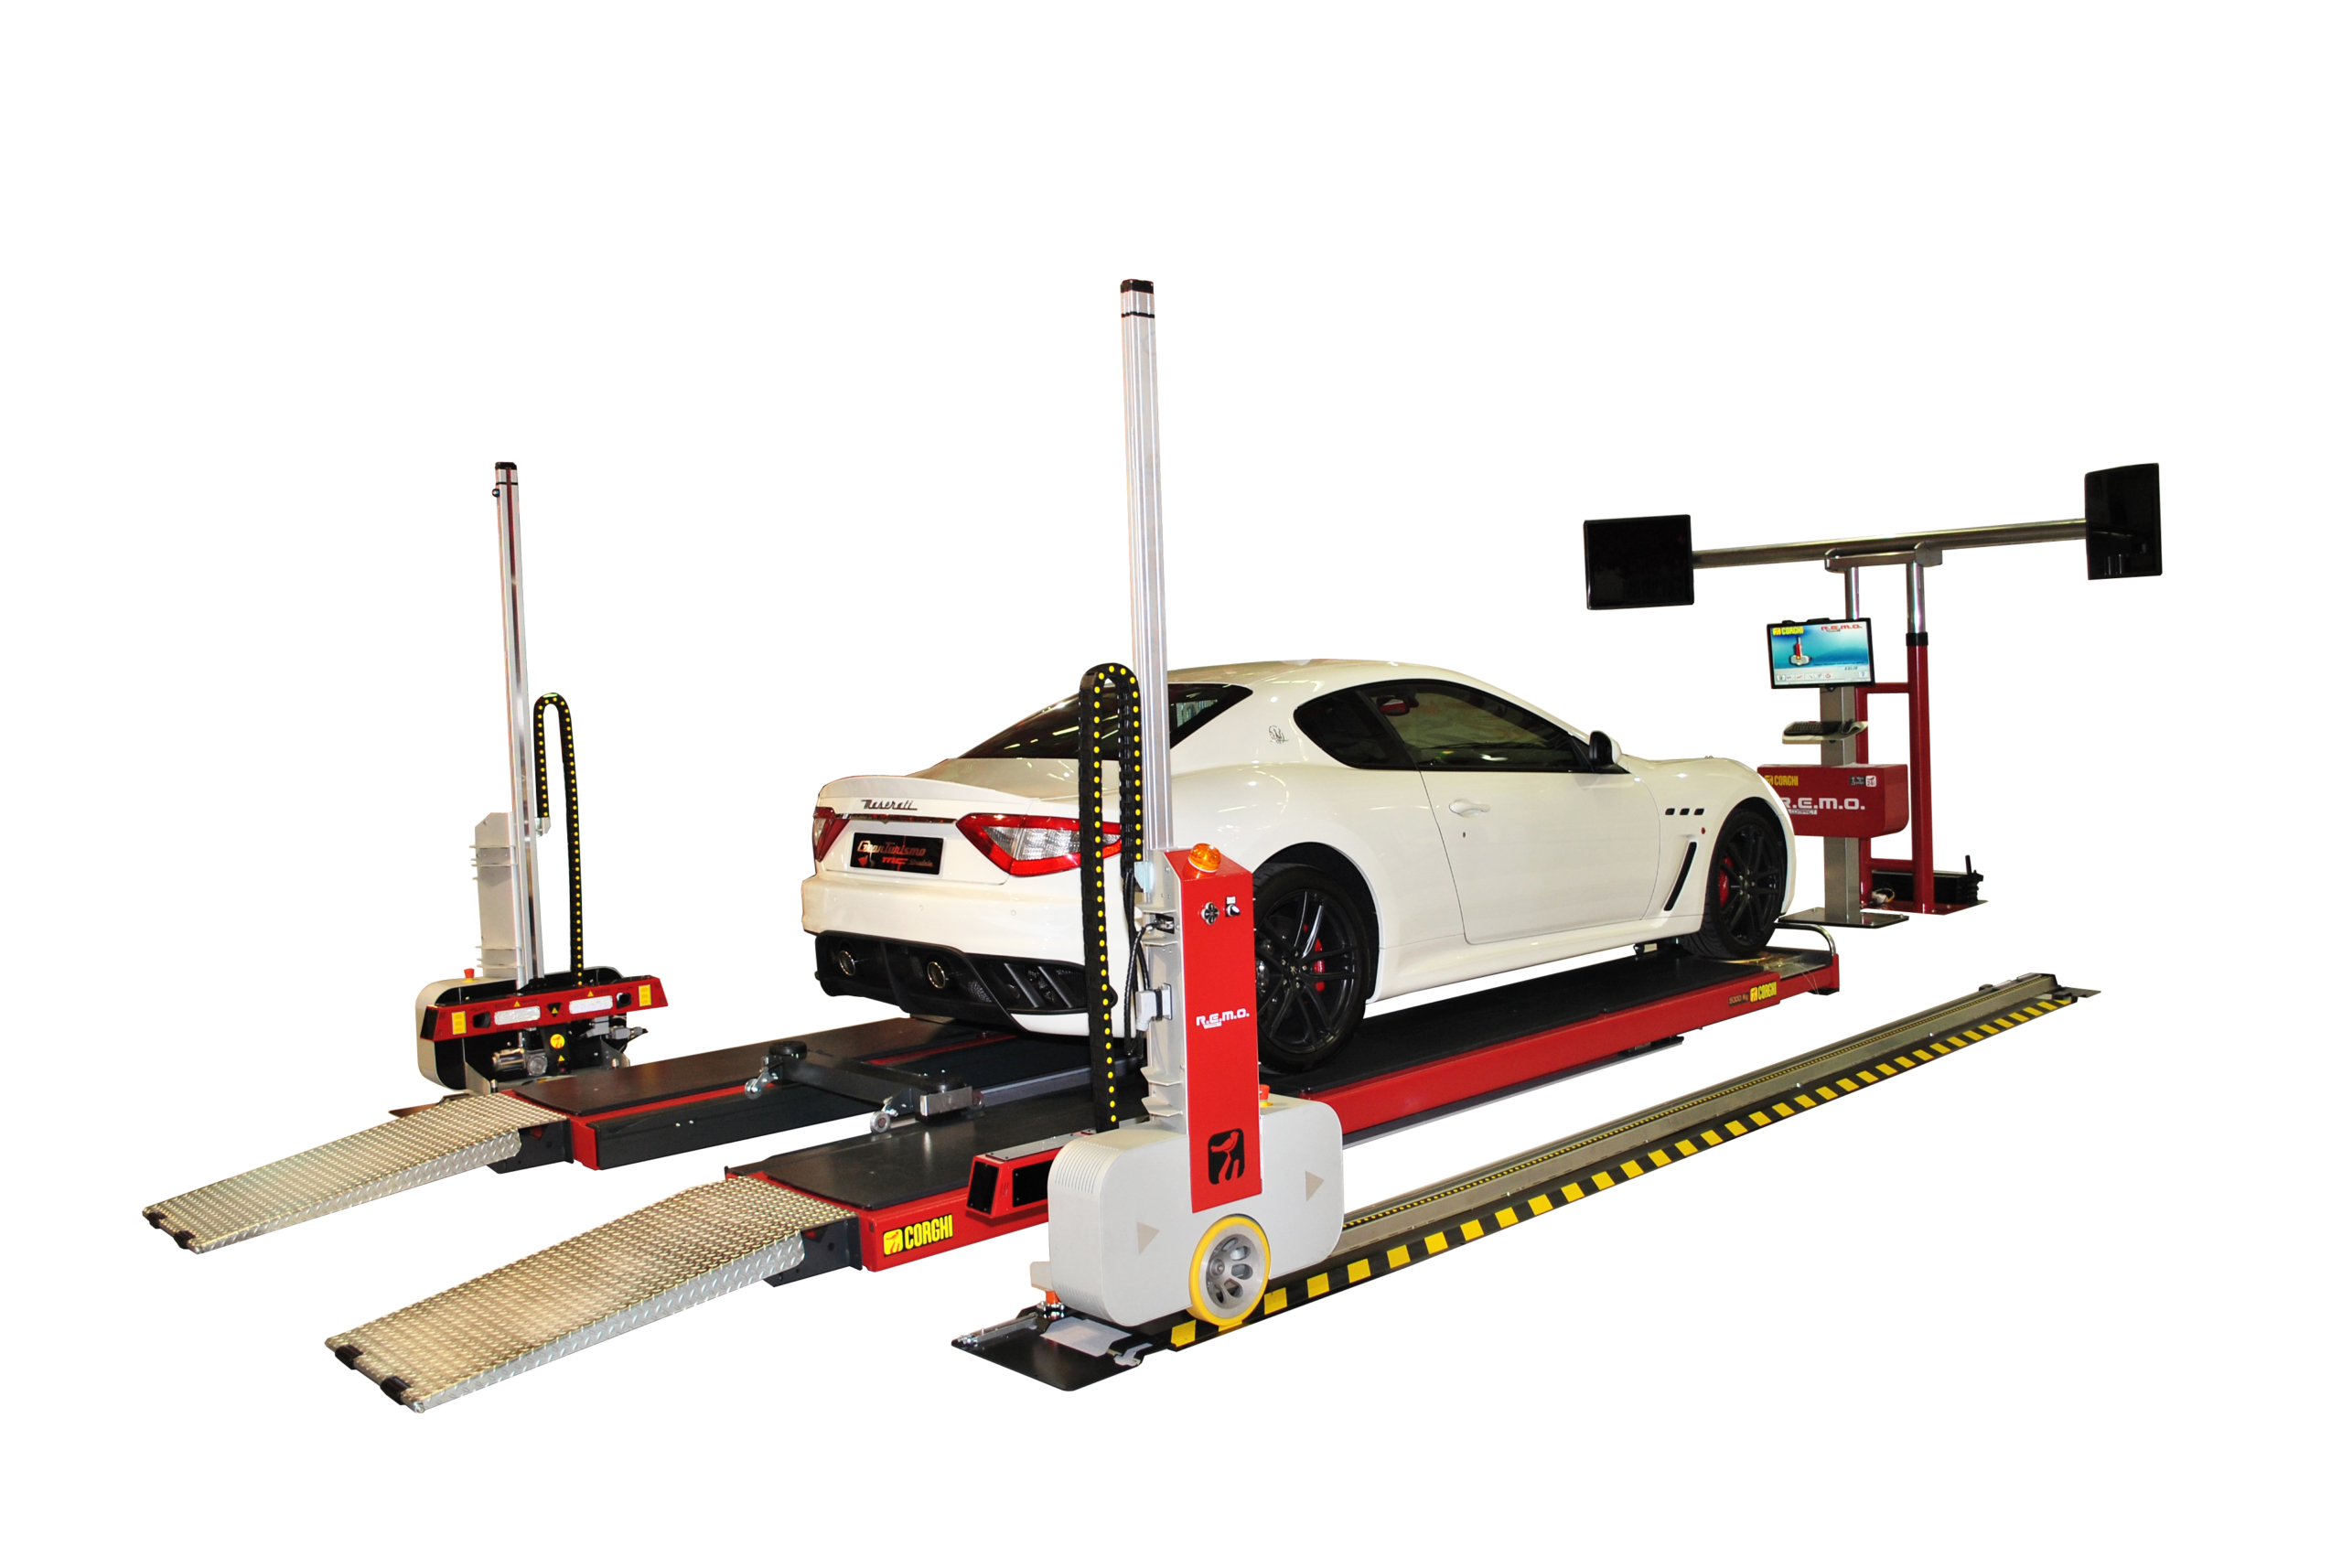 What Is Wheel Alignment?